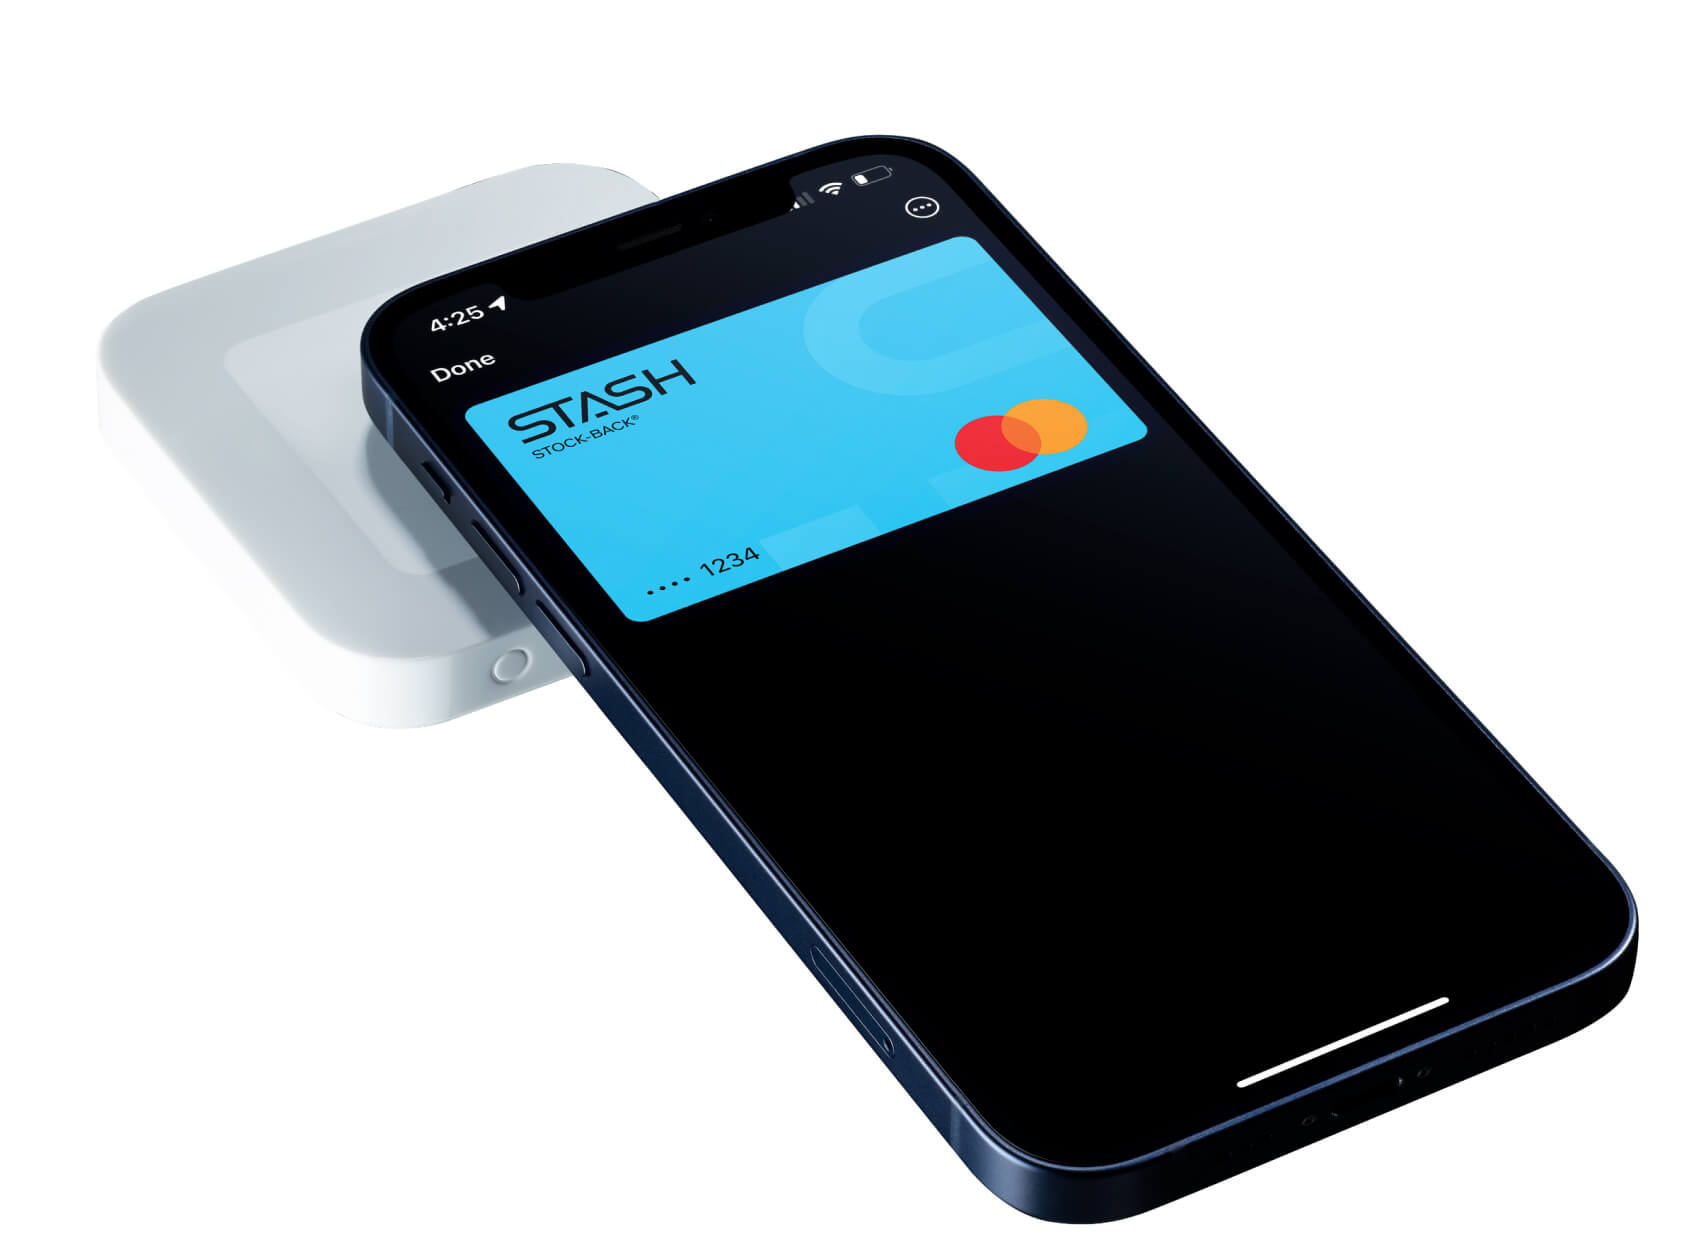 Mobile device making a payment with Stash bank card